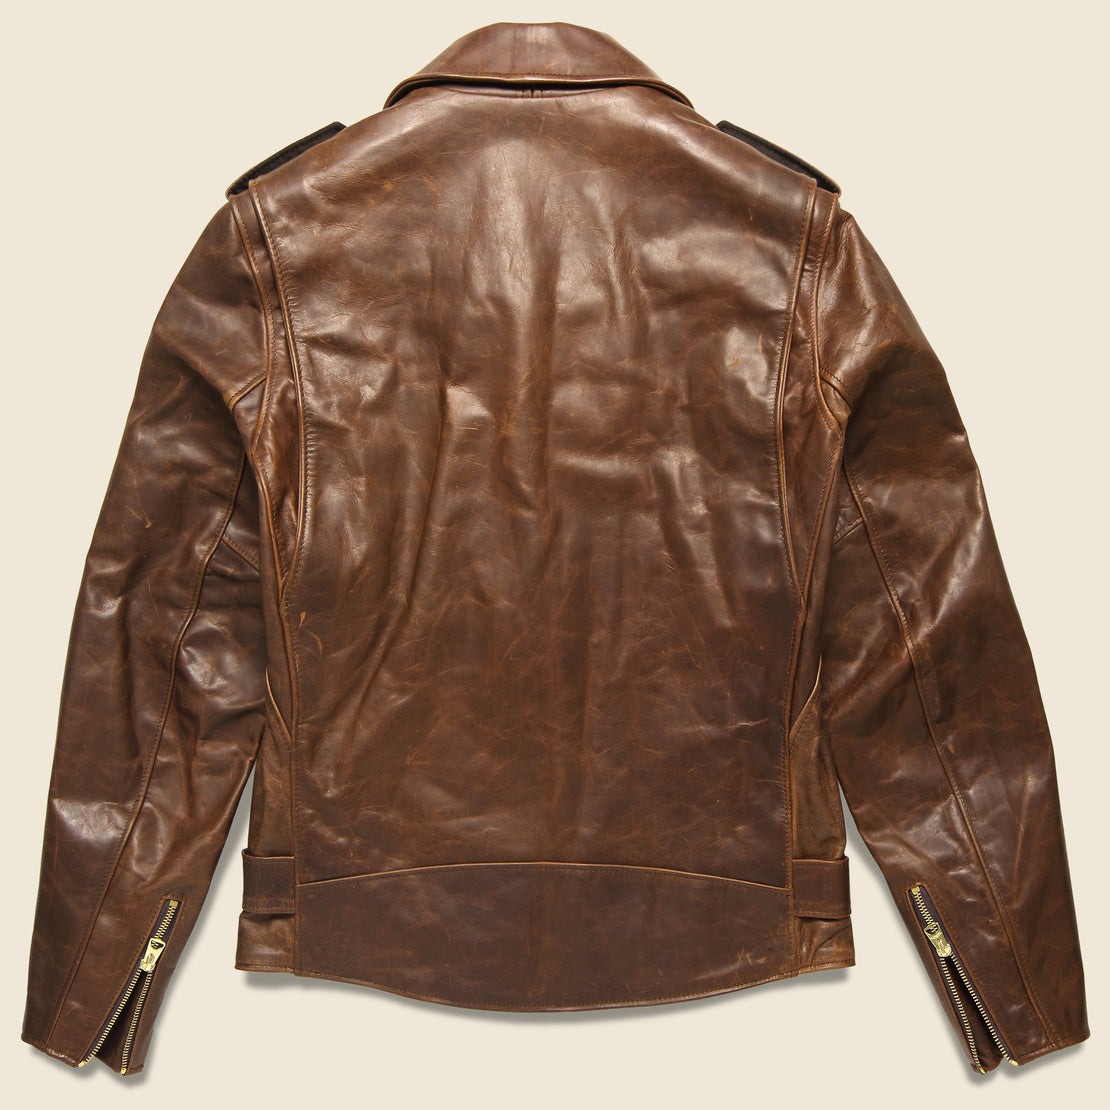 Perfecto Moto Jacket - Brown - Schott - STAG Provisions - Outerwear - Coat / Jacket